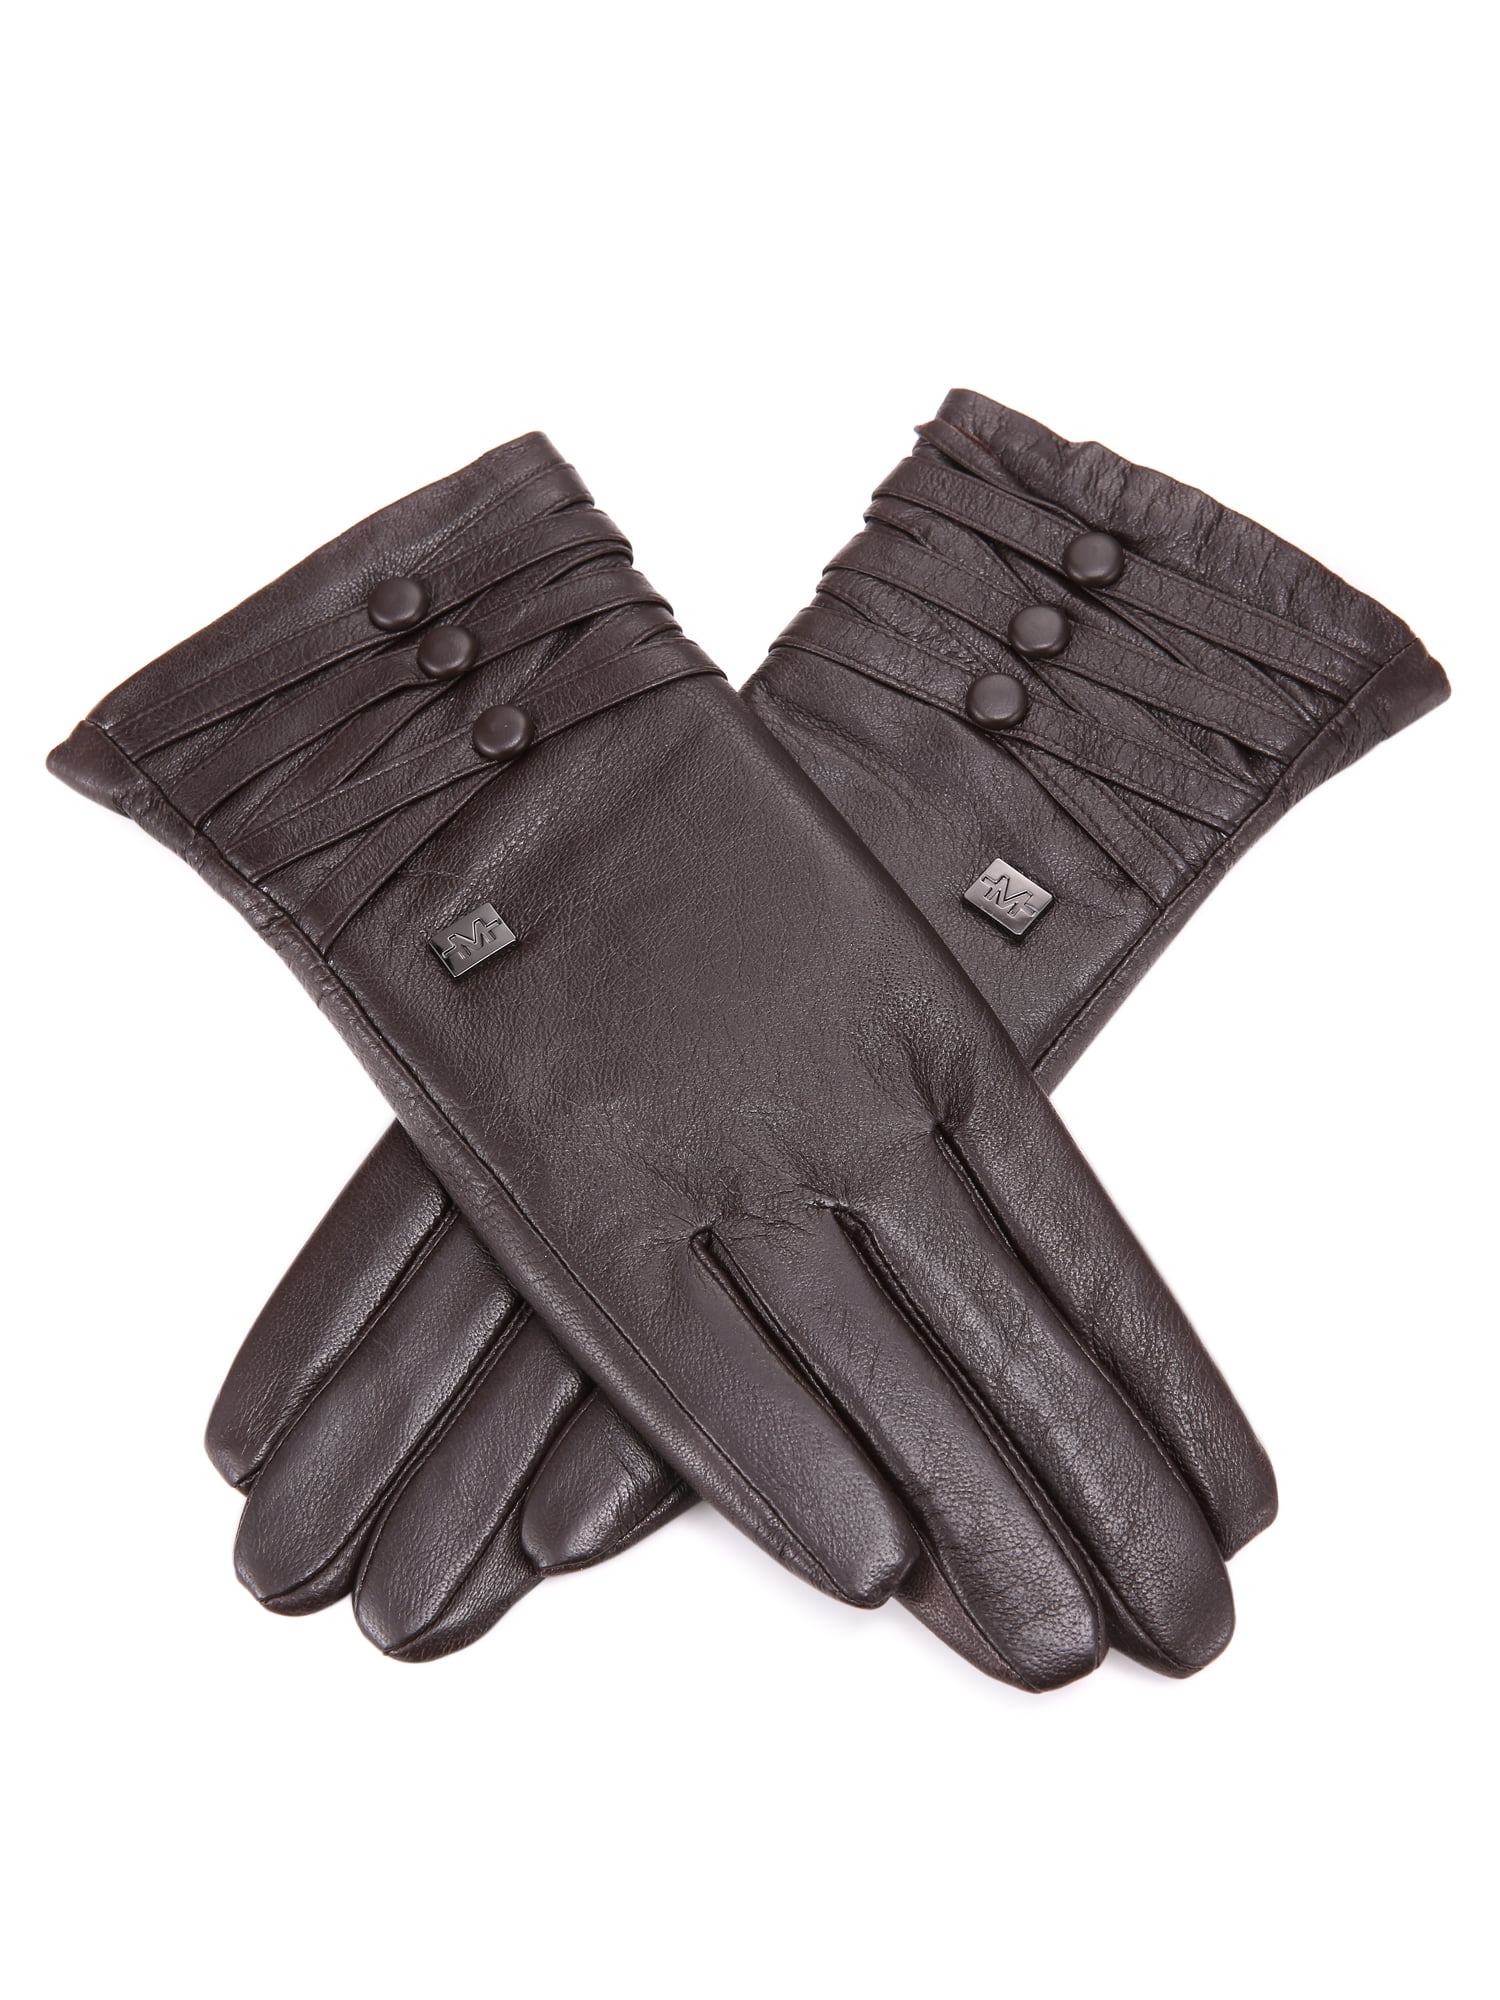 Womens Ladies Leather Gloves With Fur Trim Fleece Lined Warm Winter Christmas UK 